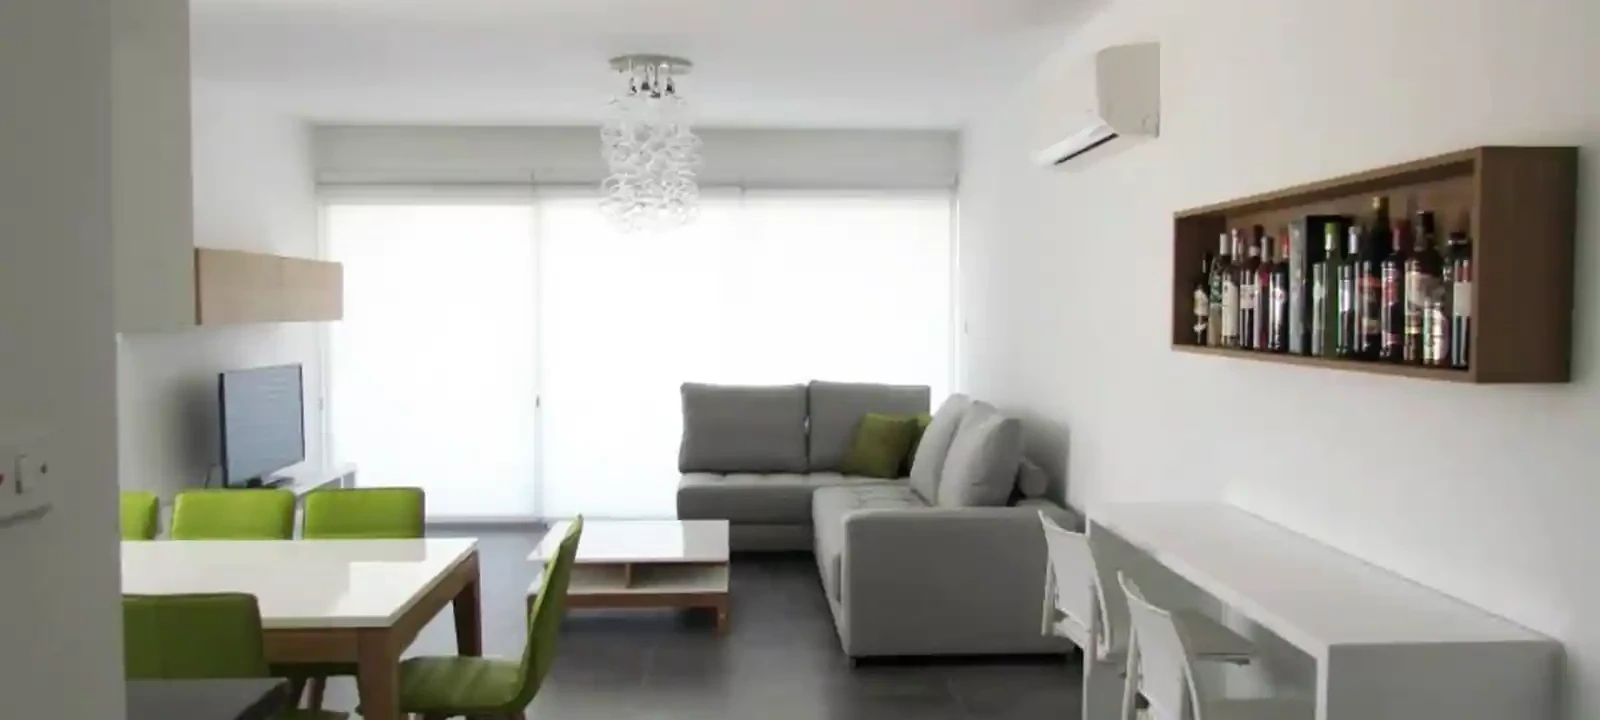 3-bedroom apartment to rent €1.600, image 1